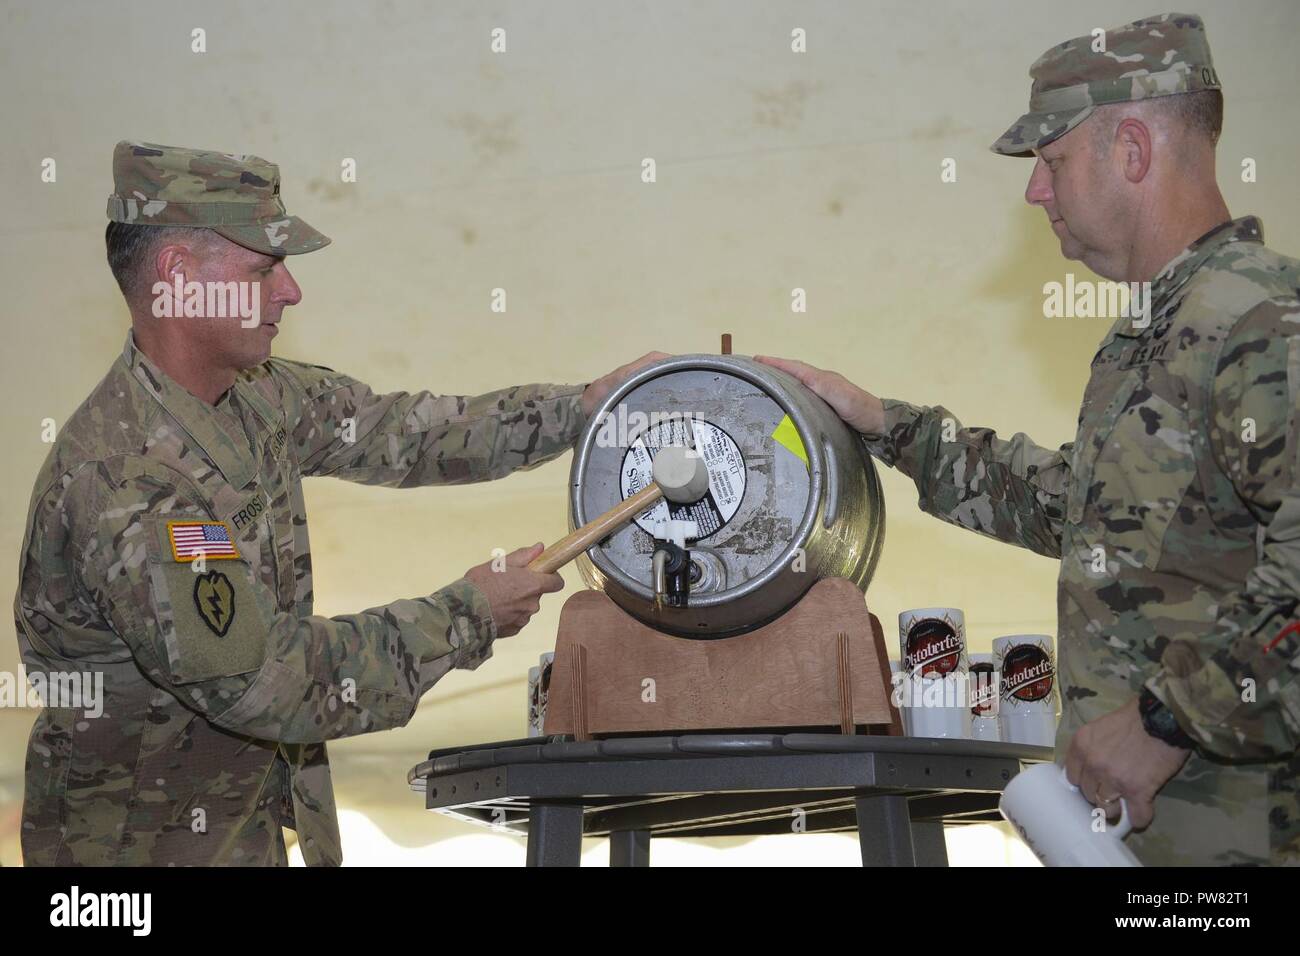 From left, U.S. Army Maj. Gen. Malcolm B. Frost, Center for Initial Military Training commanding general, and Col. Ralph L. Clayton III, 733rd Mission Support Group commander, tap the keg to officially start the Oktoberfest celebration at Joint Base Langley-Eustis, Va., Sept. 22, 2017. The first Oktoberfest was held in 1810 in Munich, Germany, to honor the marriage between Prince Ludwig and Therese of Saxe-Hildburghausen. Stock Photo